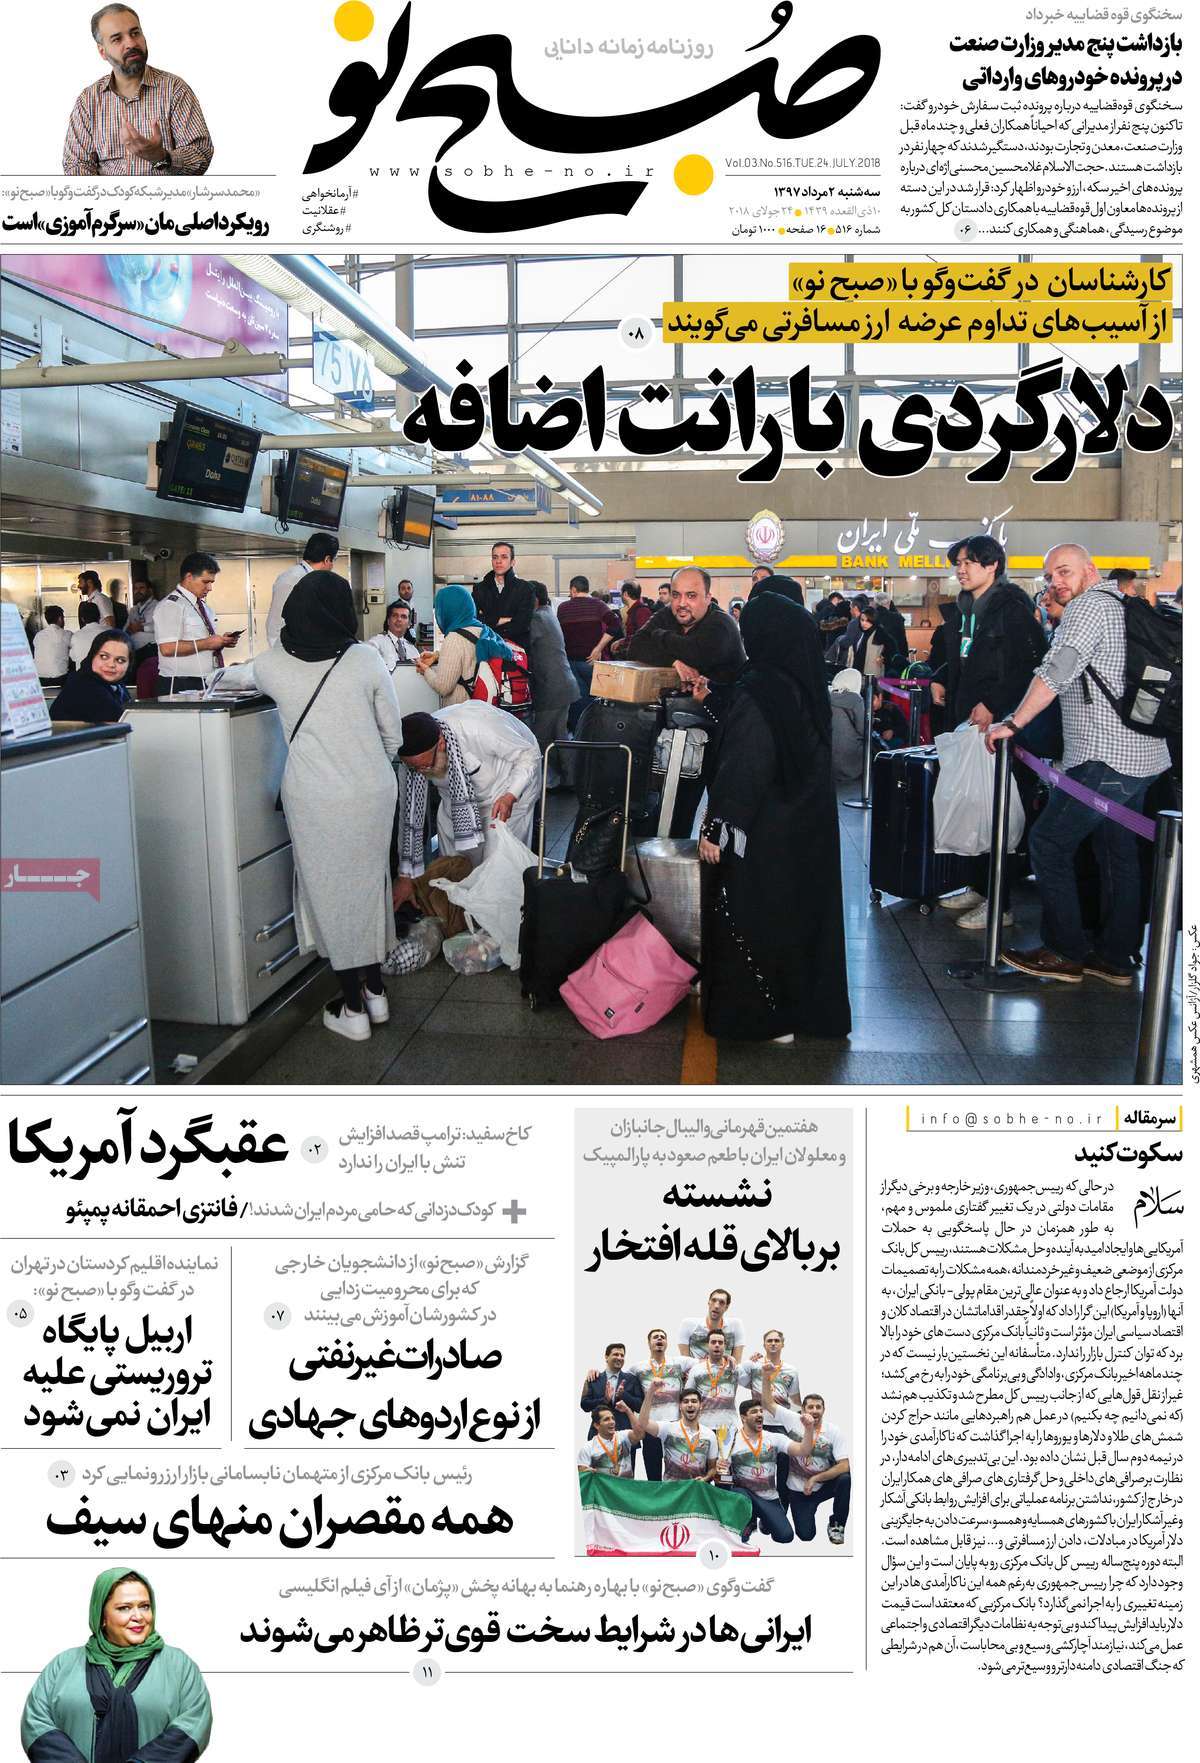 A Look at Iranian Newspaper Front Pages on July 24